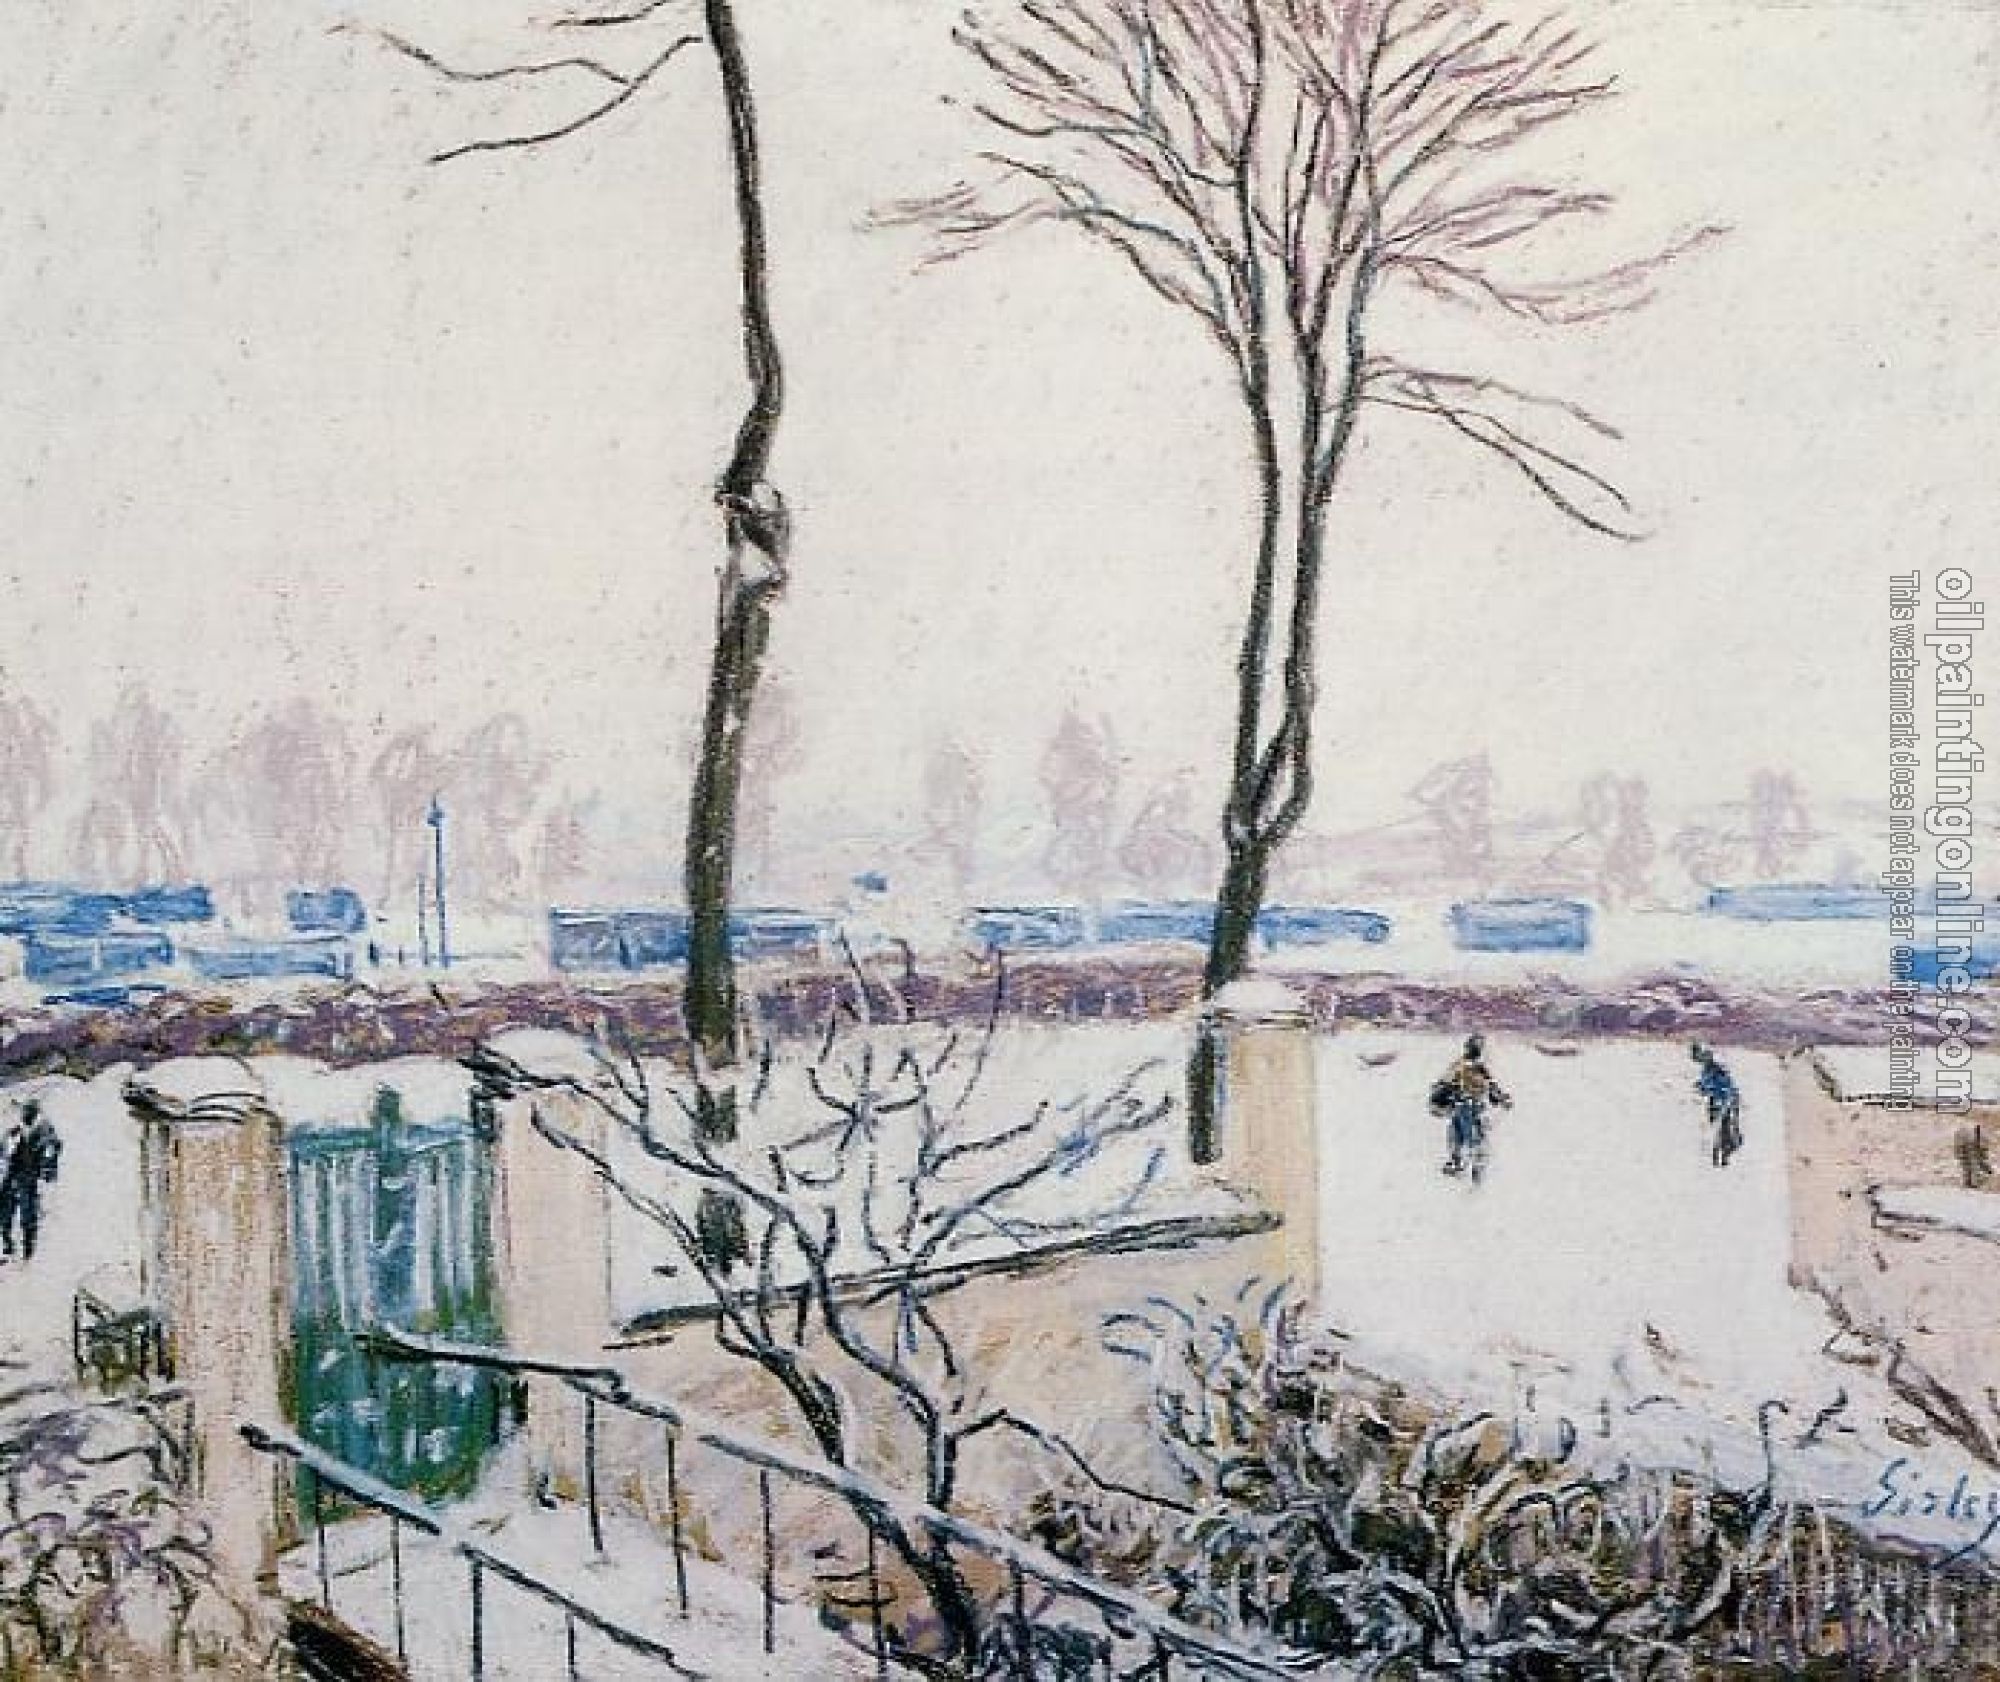 Sisley, Alfred - Approach to the Railway Station